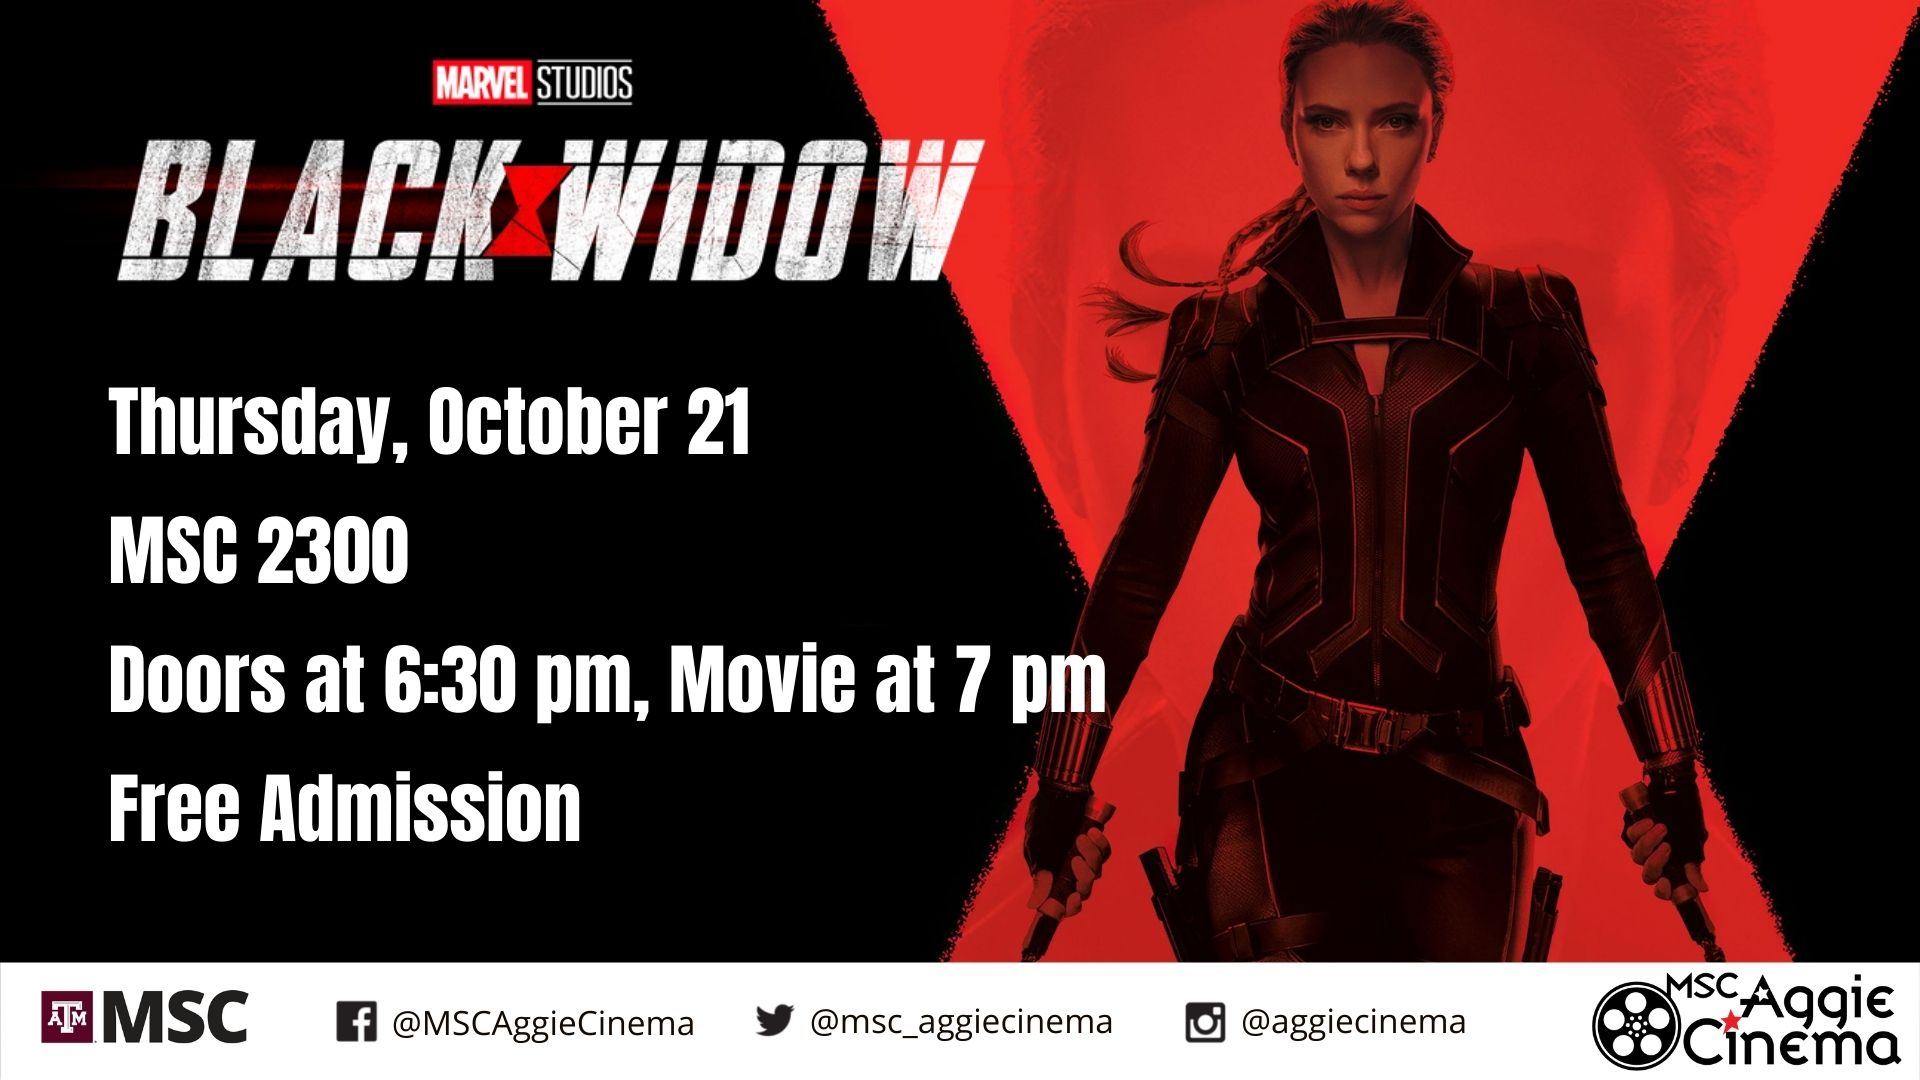 Black Widow on October 21 in MSC 2300 at 7 p.m. Free Admission